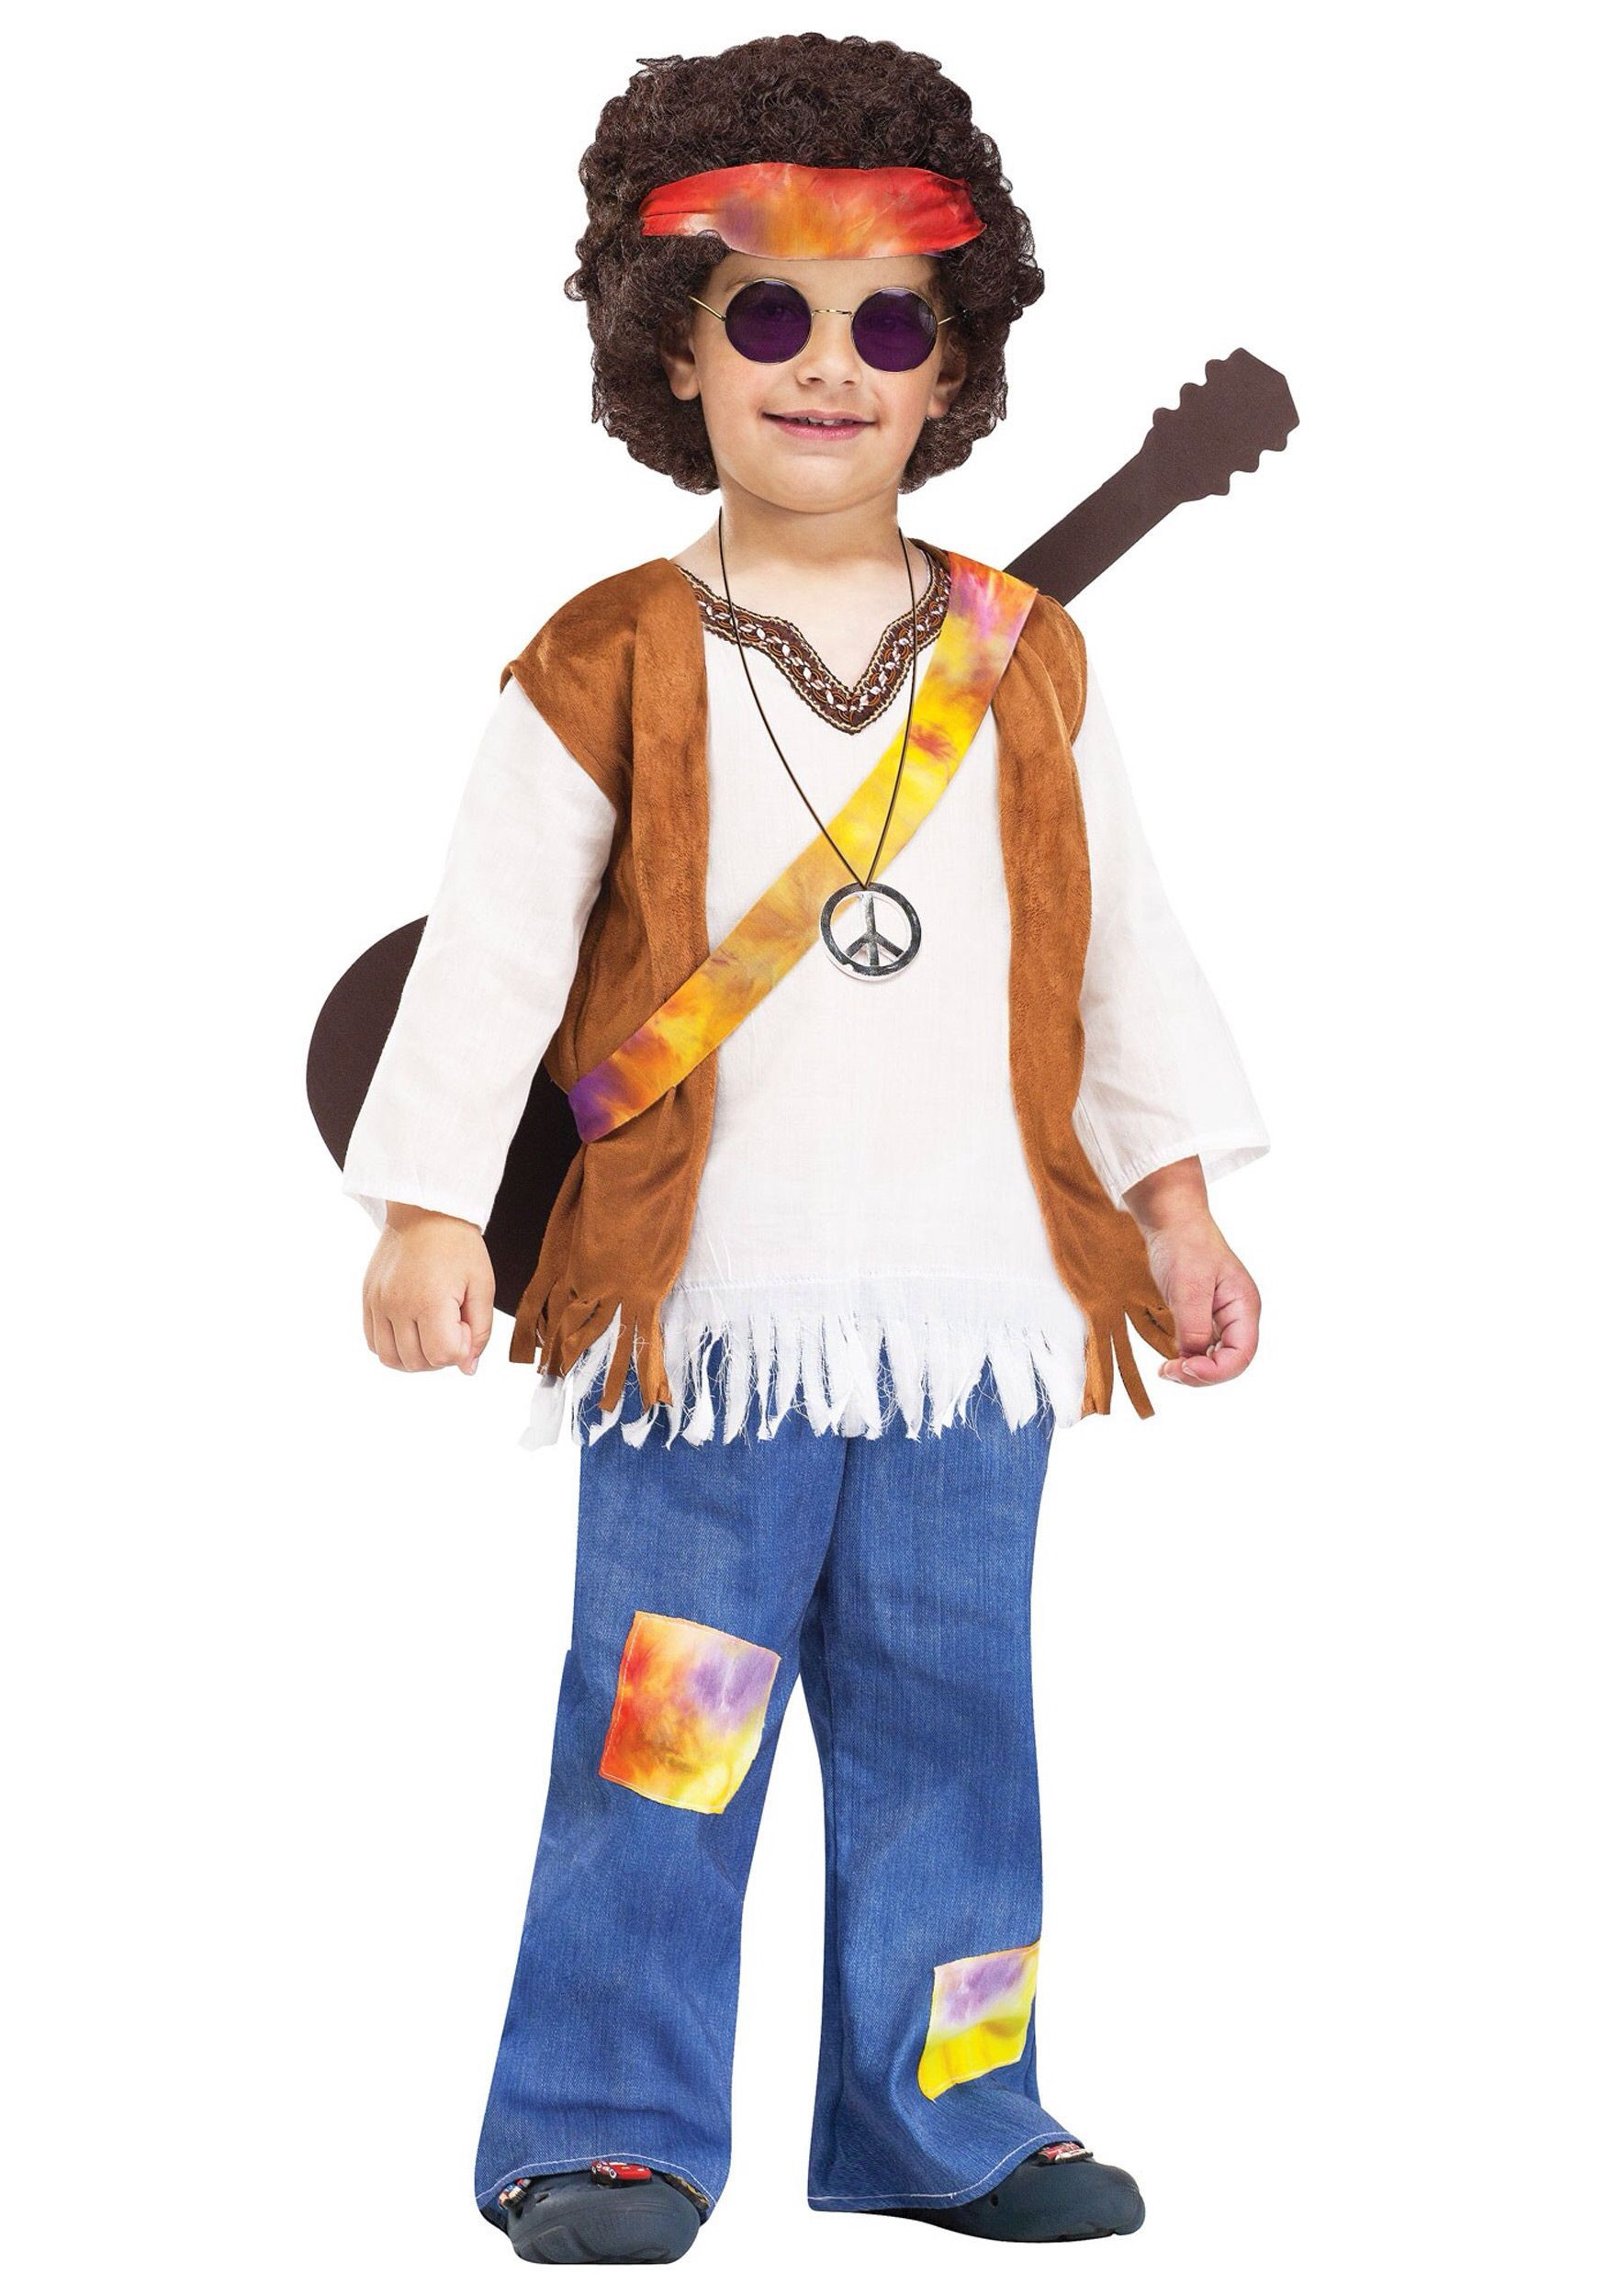 70S Dress Up Ideas For Kids
 Costume Costumes kids and parents Pinterest